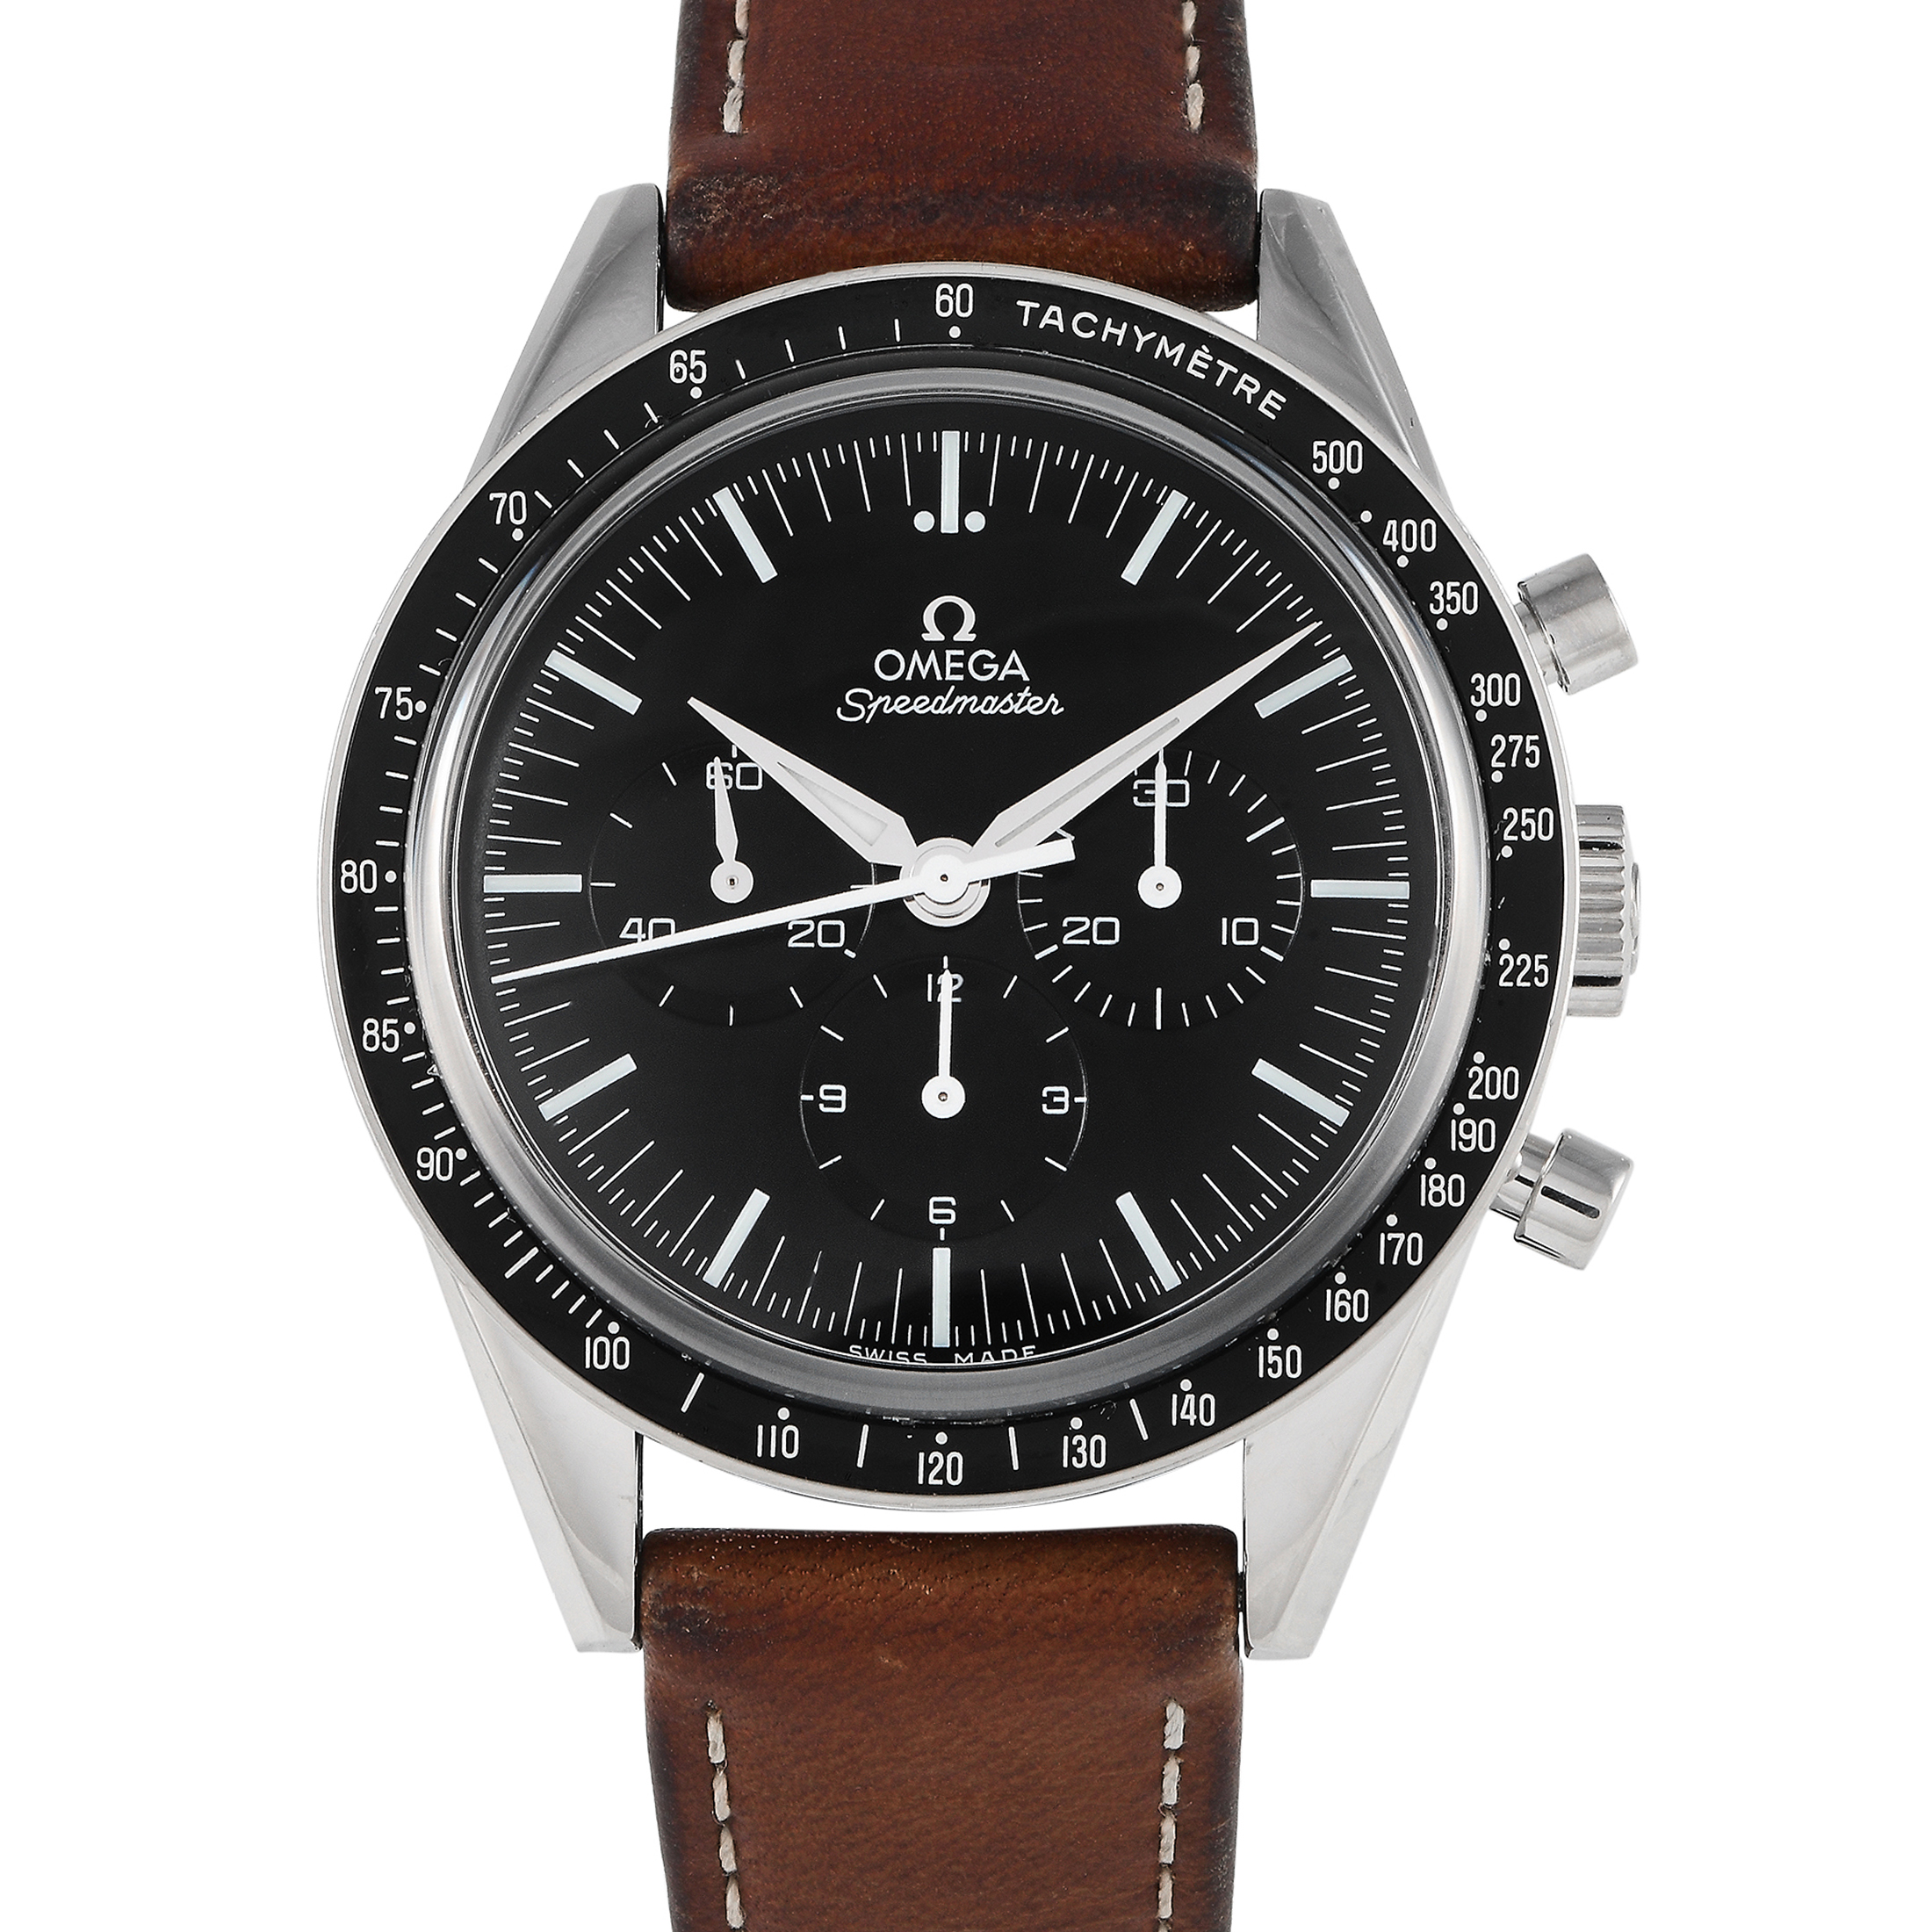 Omega Speedmaster First Omega in Space Anniversary Watch 311.32.40.30.01.001